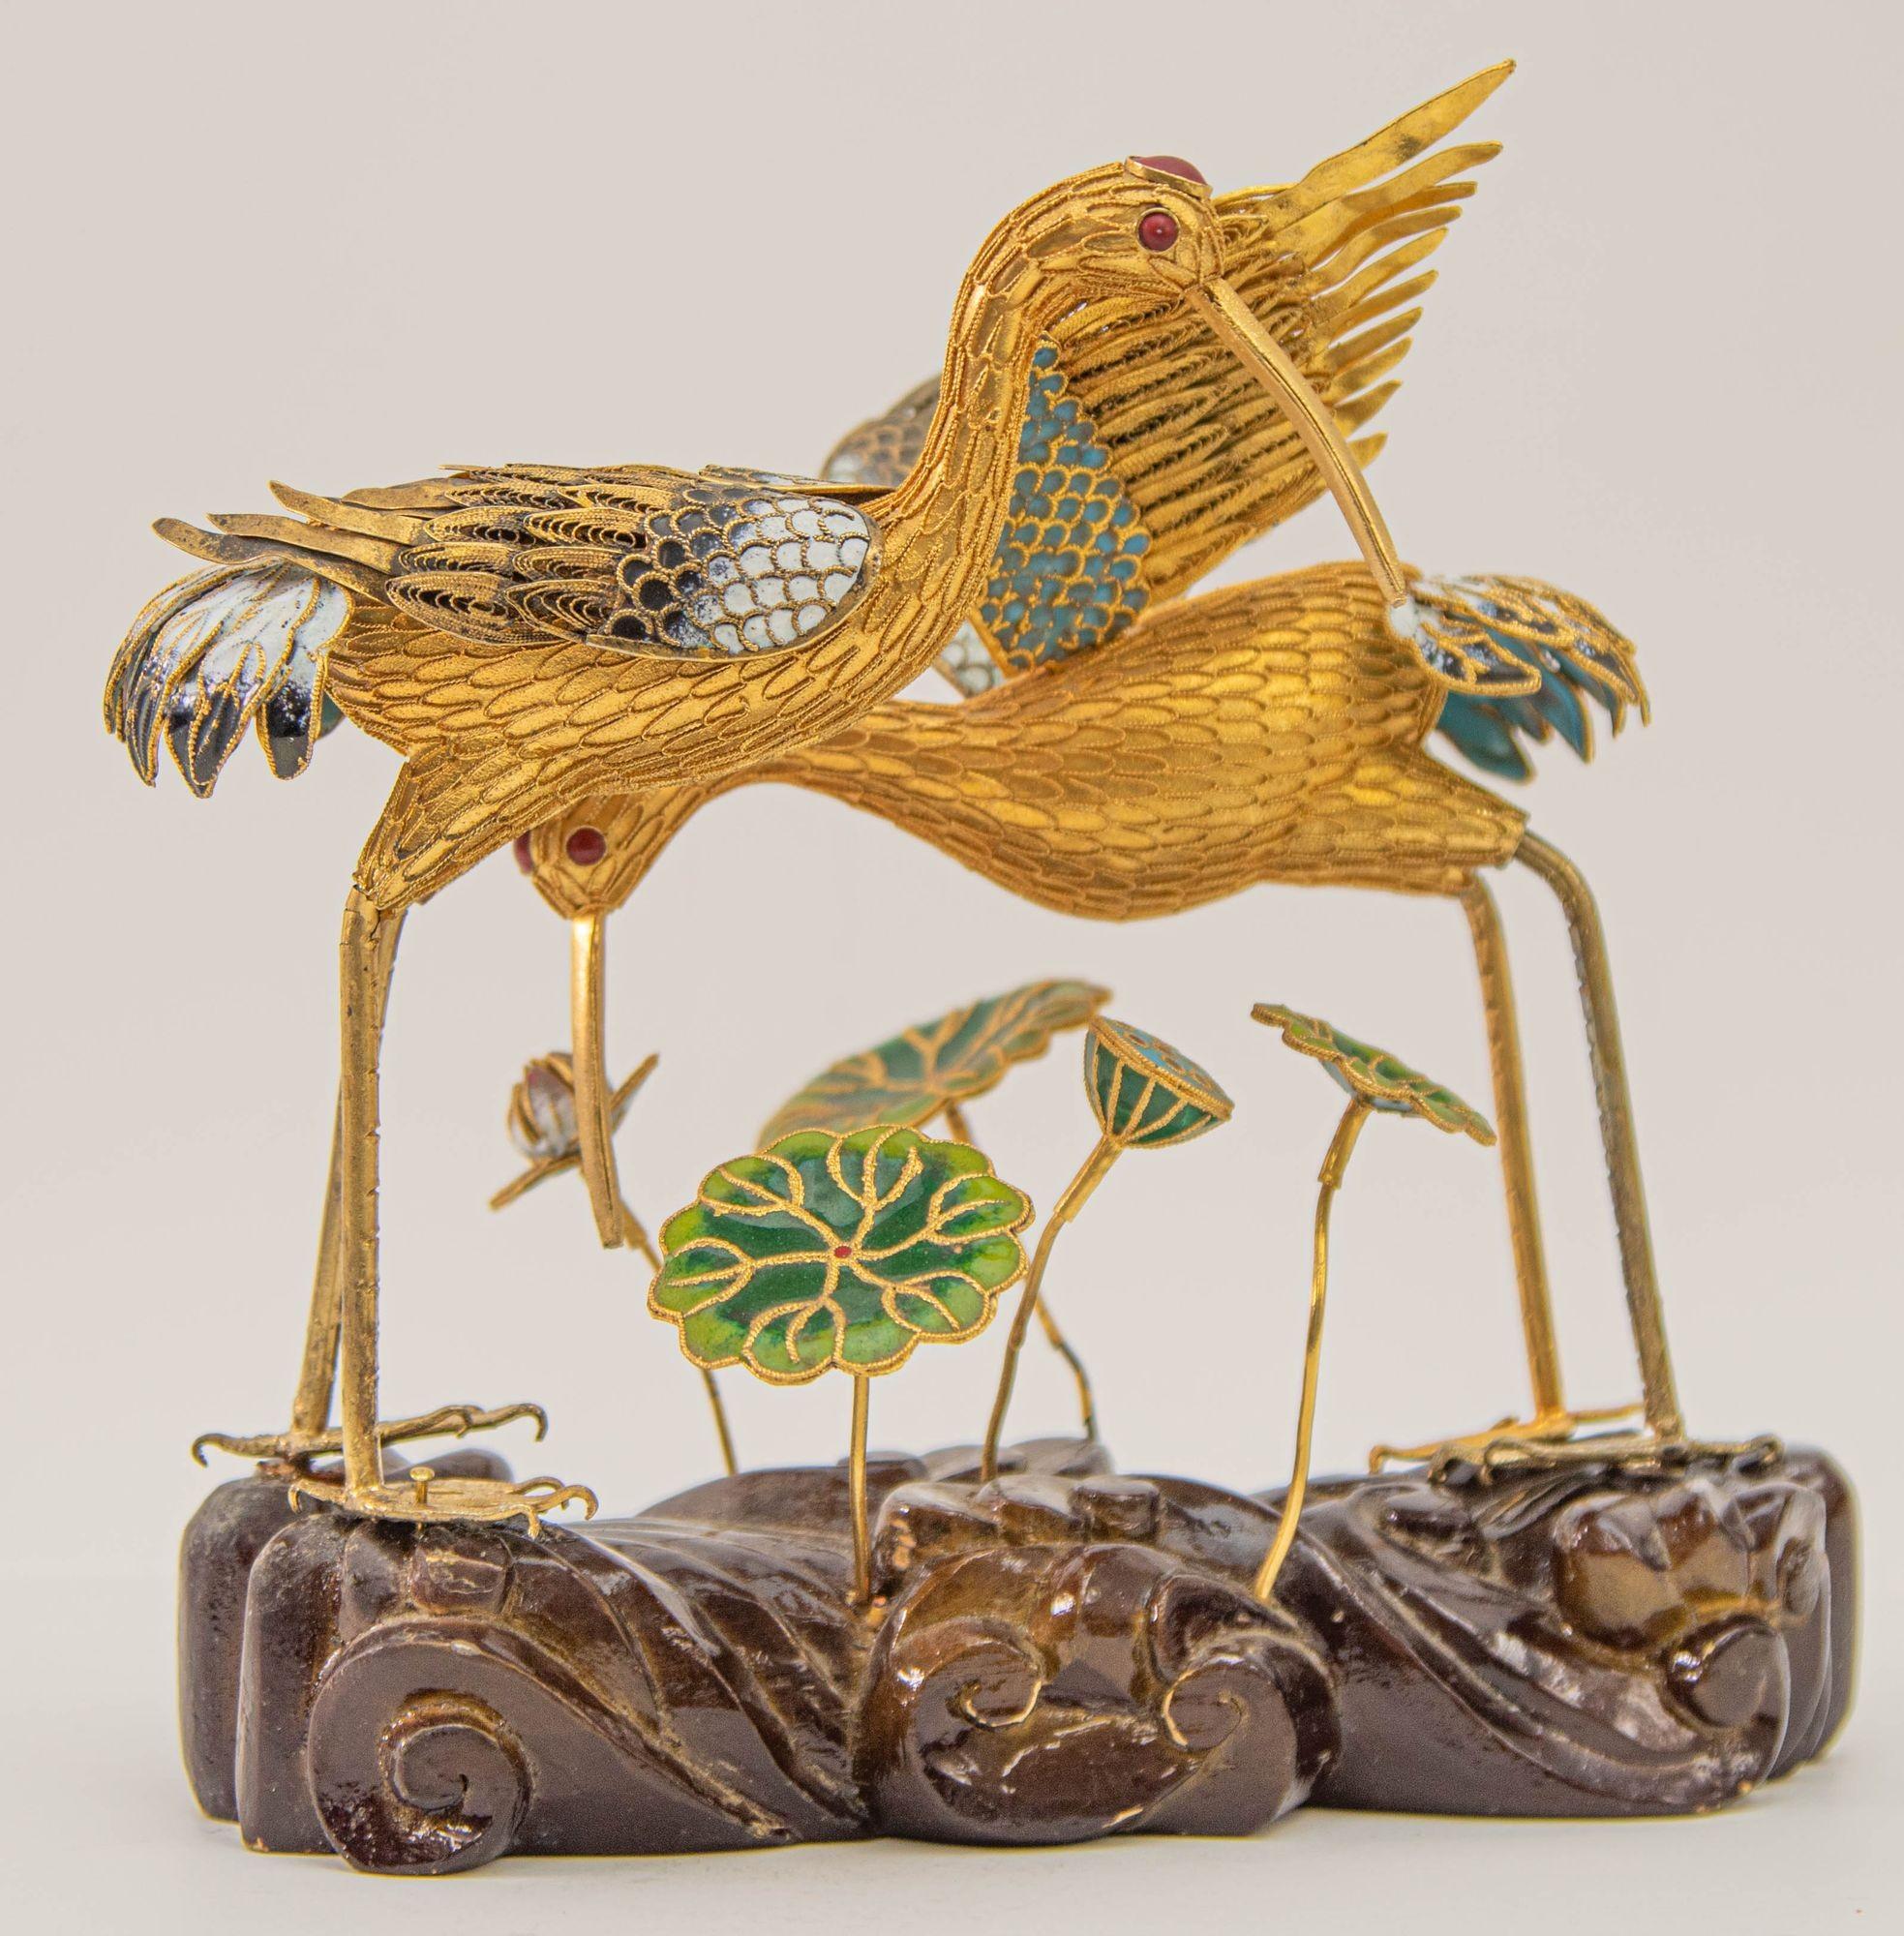 Chinese Export Vintage Chinese Metal Gilt Filigree and Enamel Cranes Figures on Wooden Stand For Sale